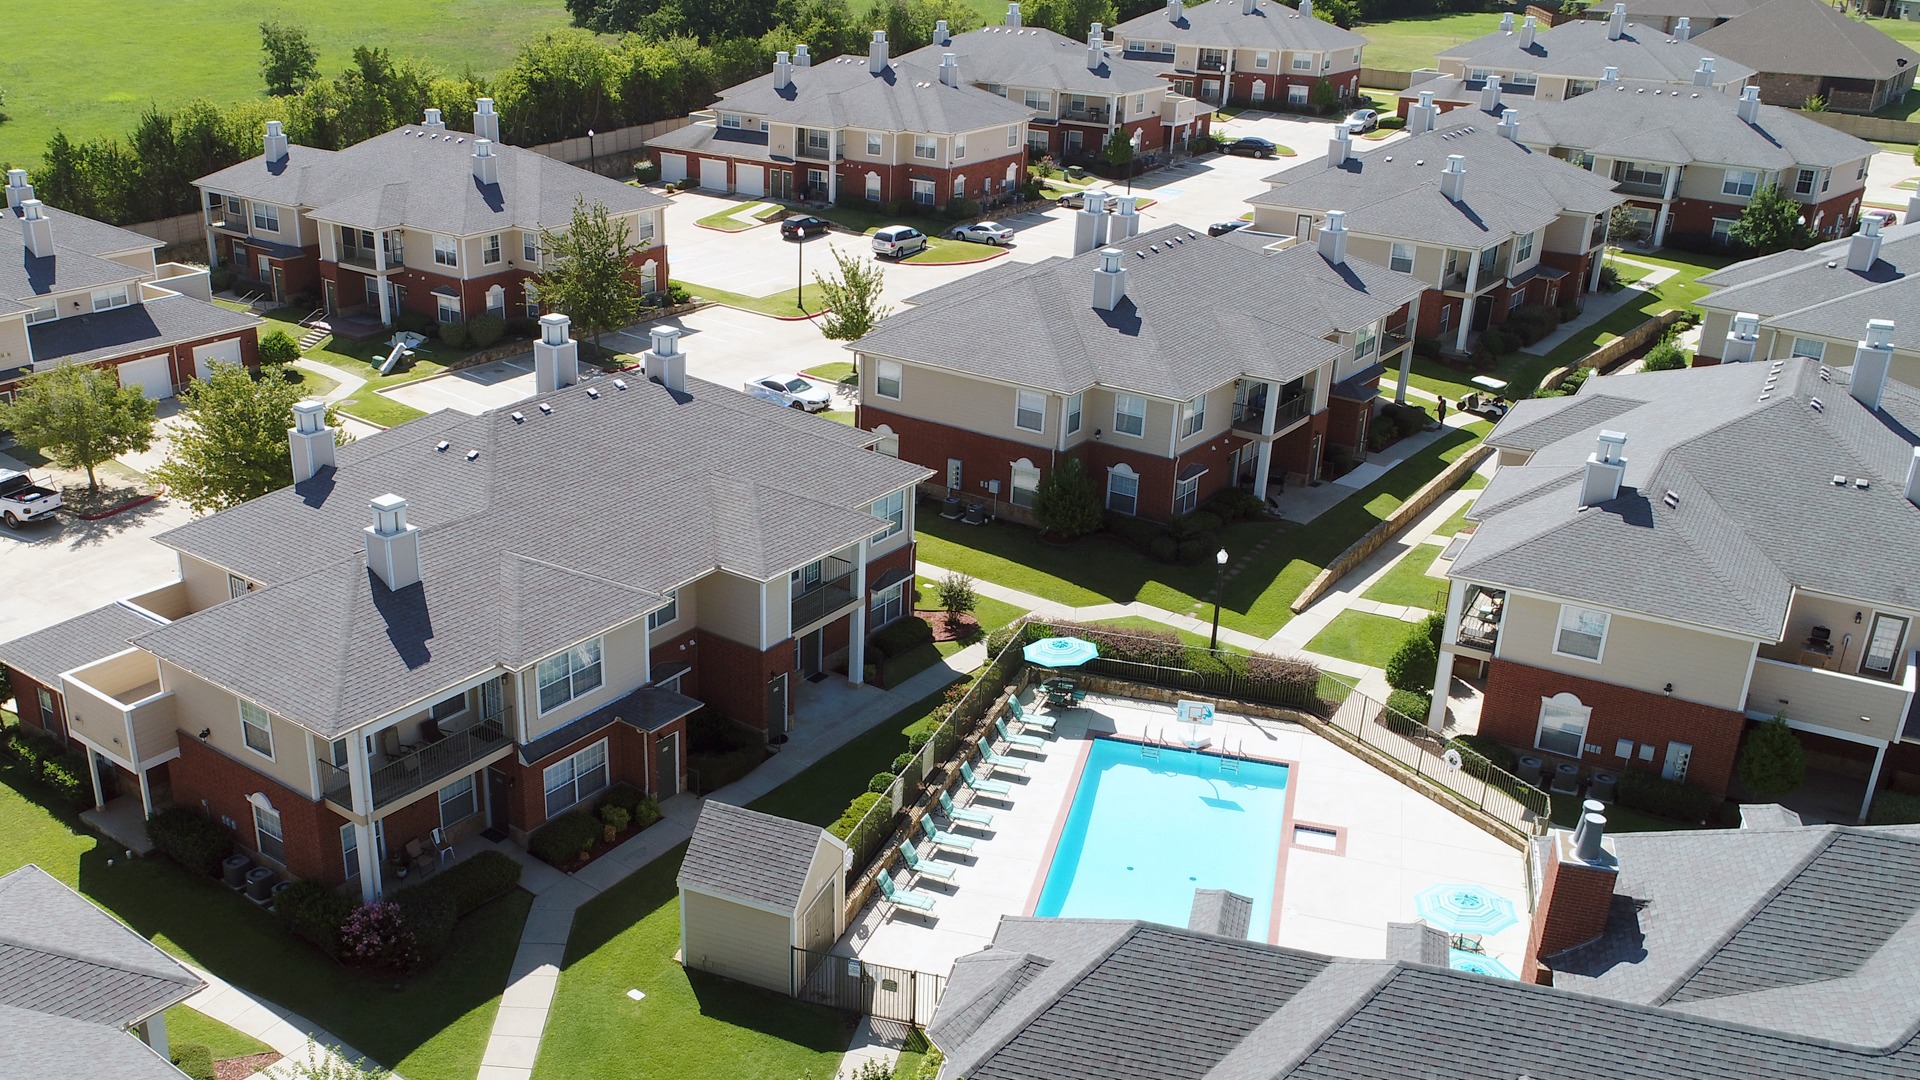 Arial shot of Stone Creek Apartments with manor-like buildings and a pool